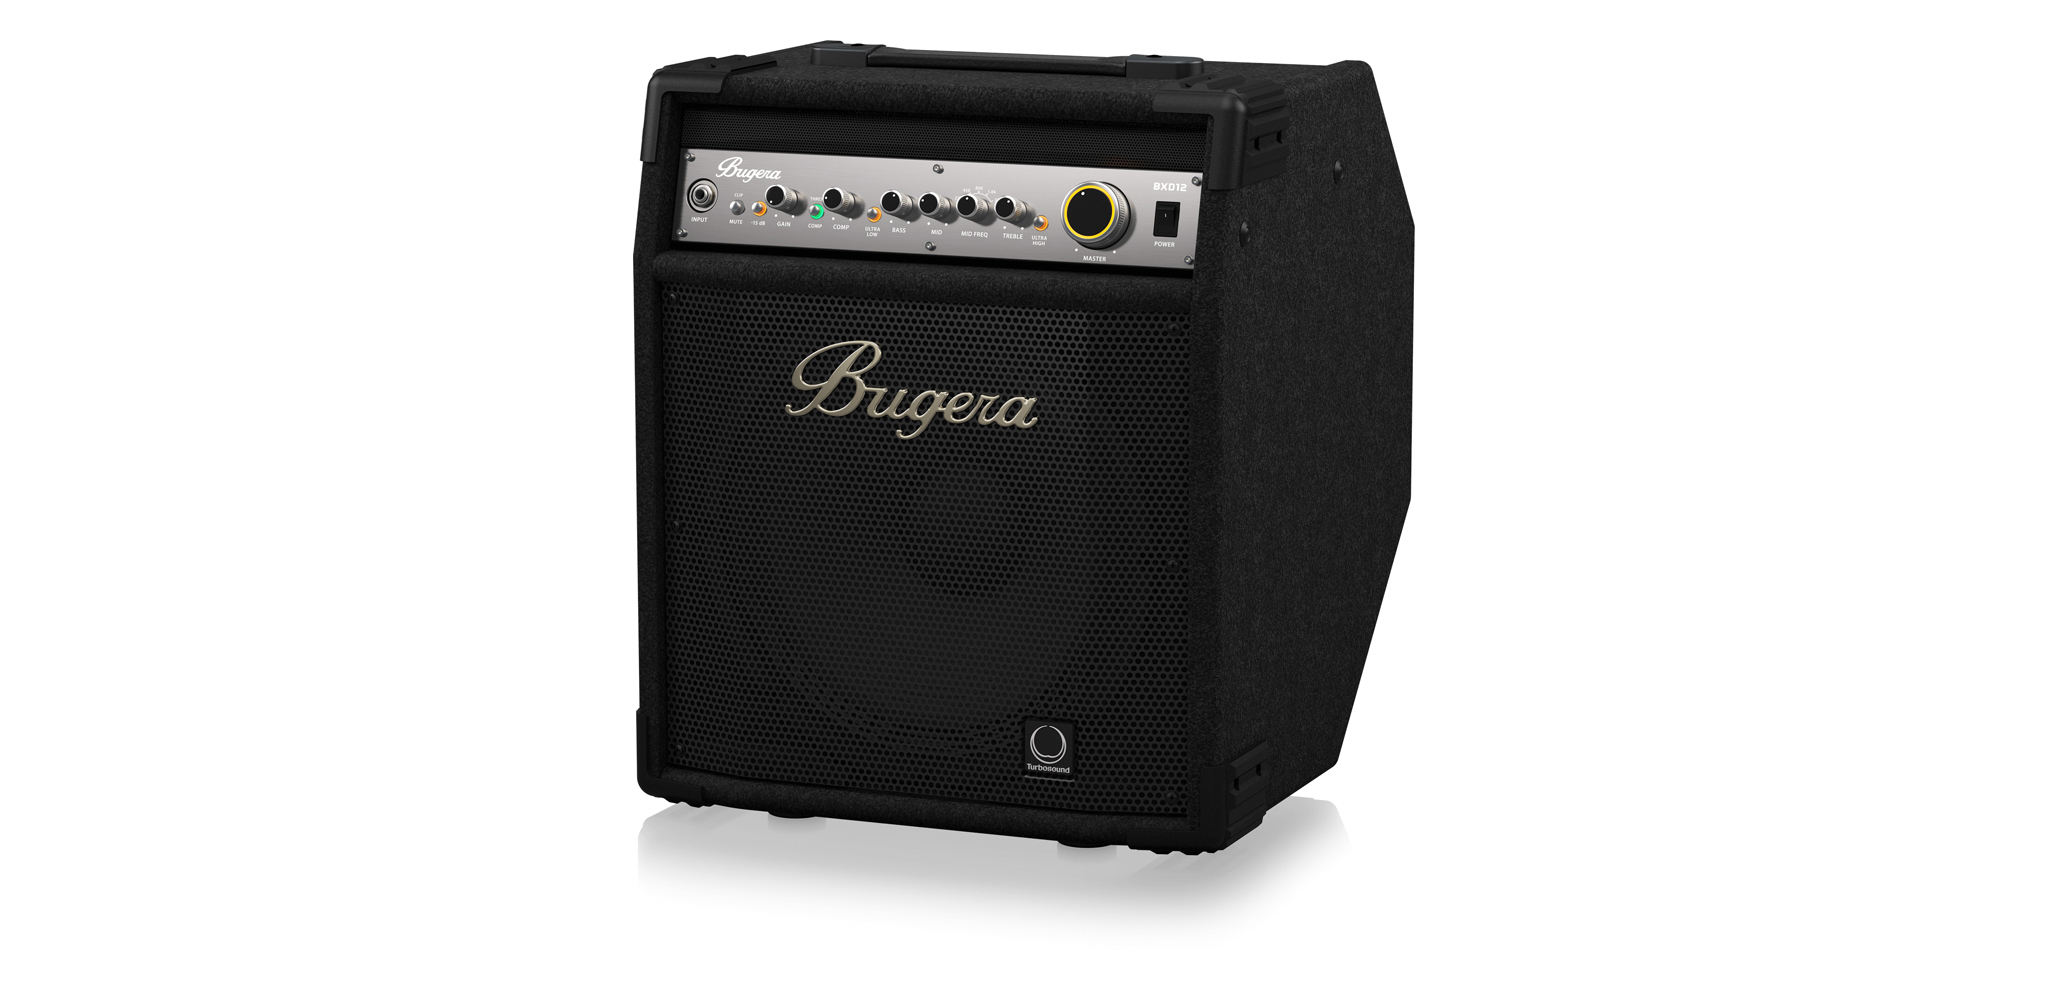 SolidState　Combo　Bugera　Bass　Amplifier　BXD12